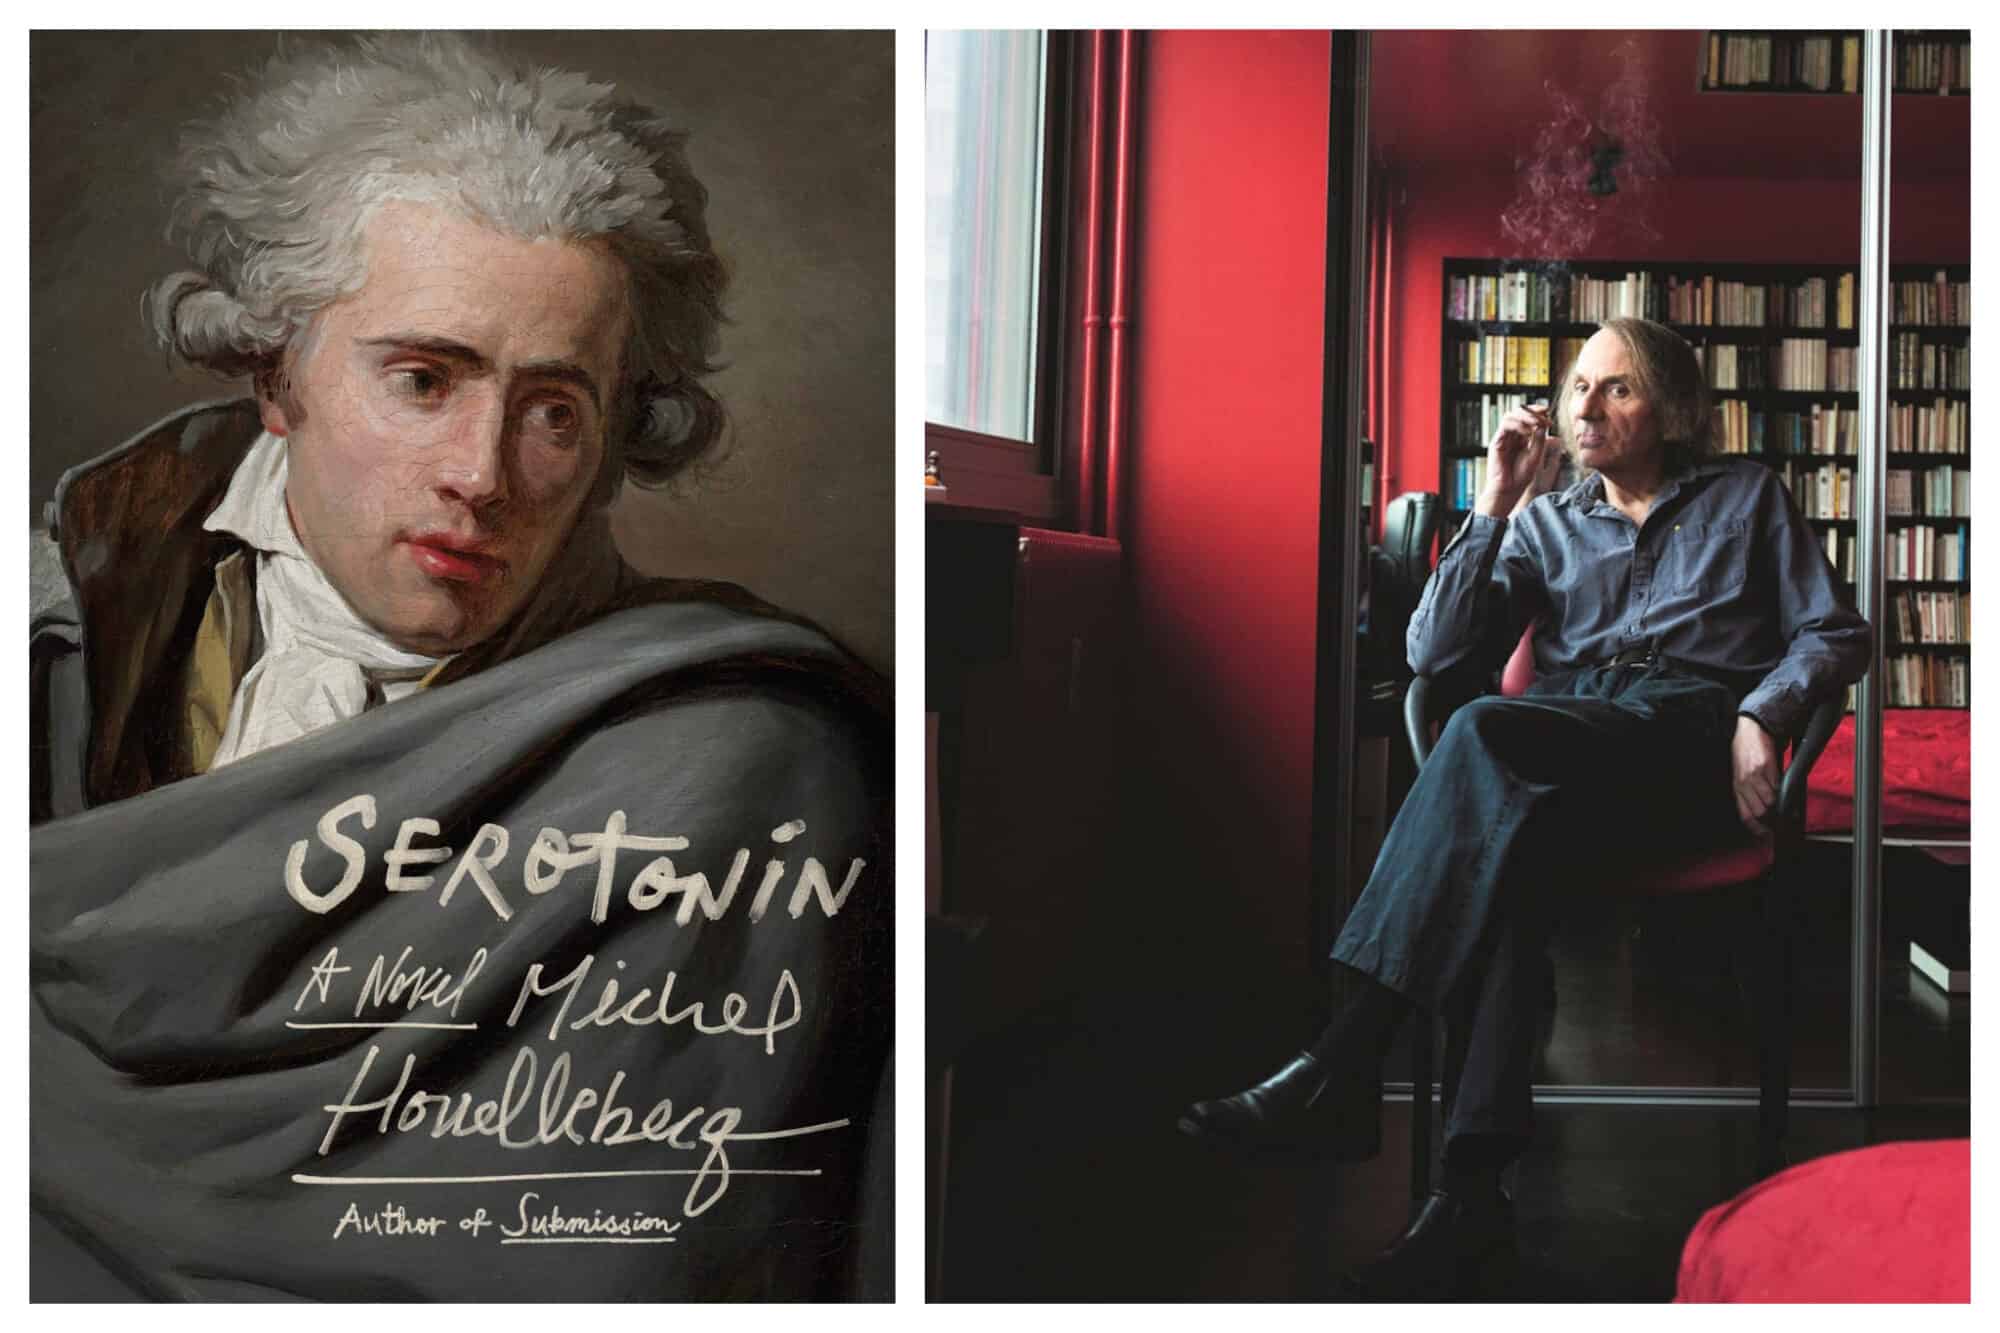 Left: The cover of Michel Houllebecq's book "Serotonin," which shows an old painting of a man, Right: Michel Houllebecq, wearing dark clothes, smokes a cigarette while sitting in a chair inside a red room. Behind him is a mirror which reflects  a shelf filled with books.